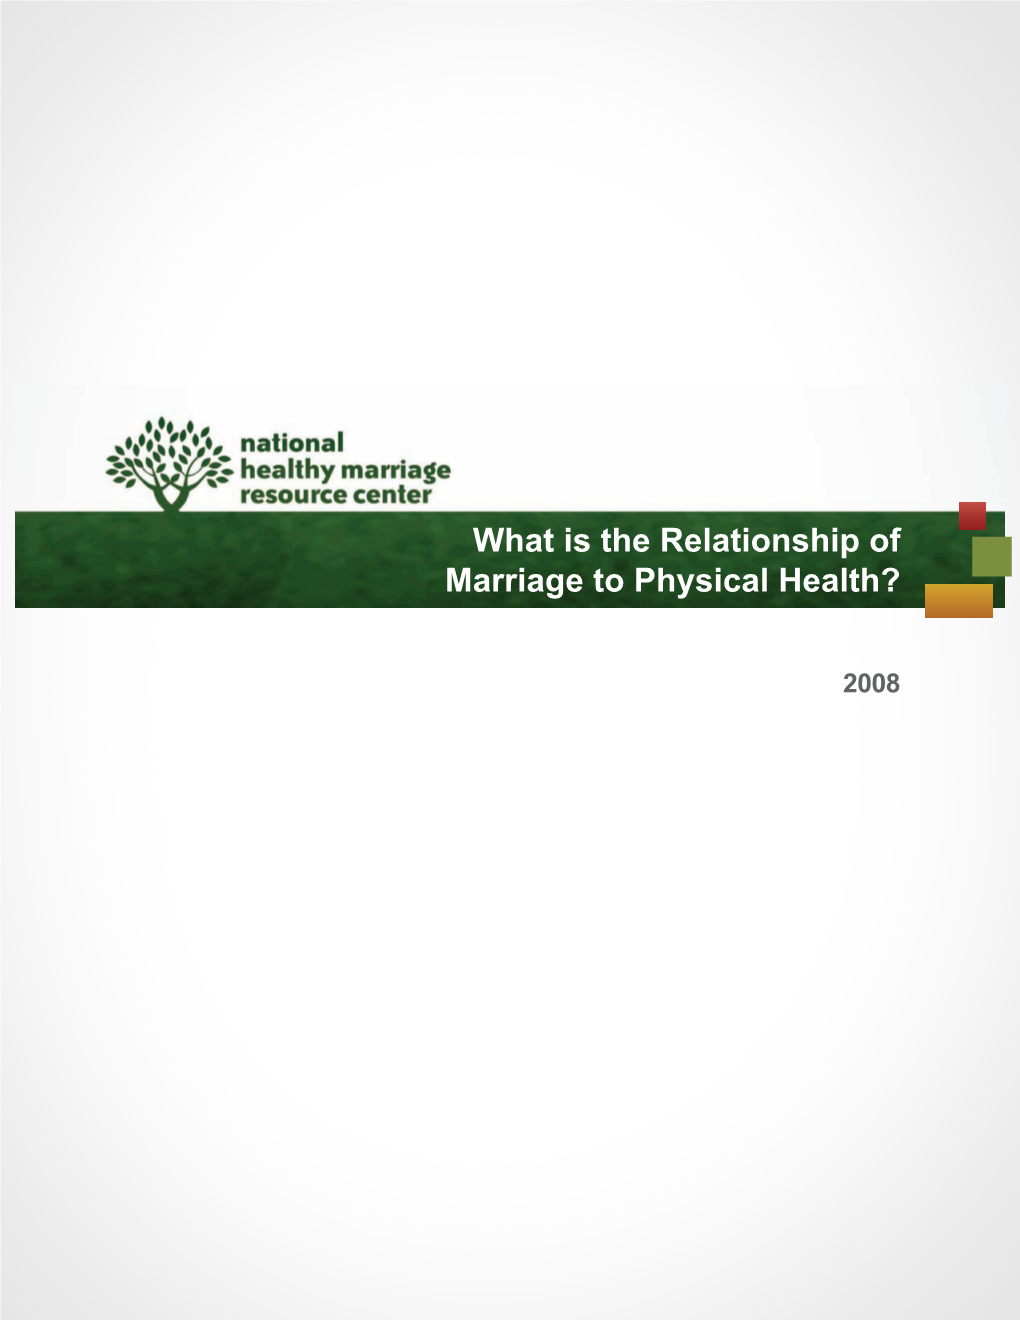 What Is the Relationship of Marriage to Physical Health?